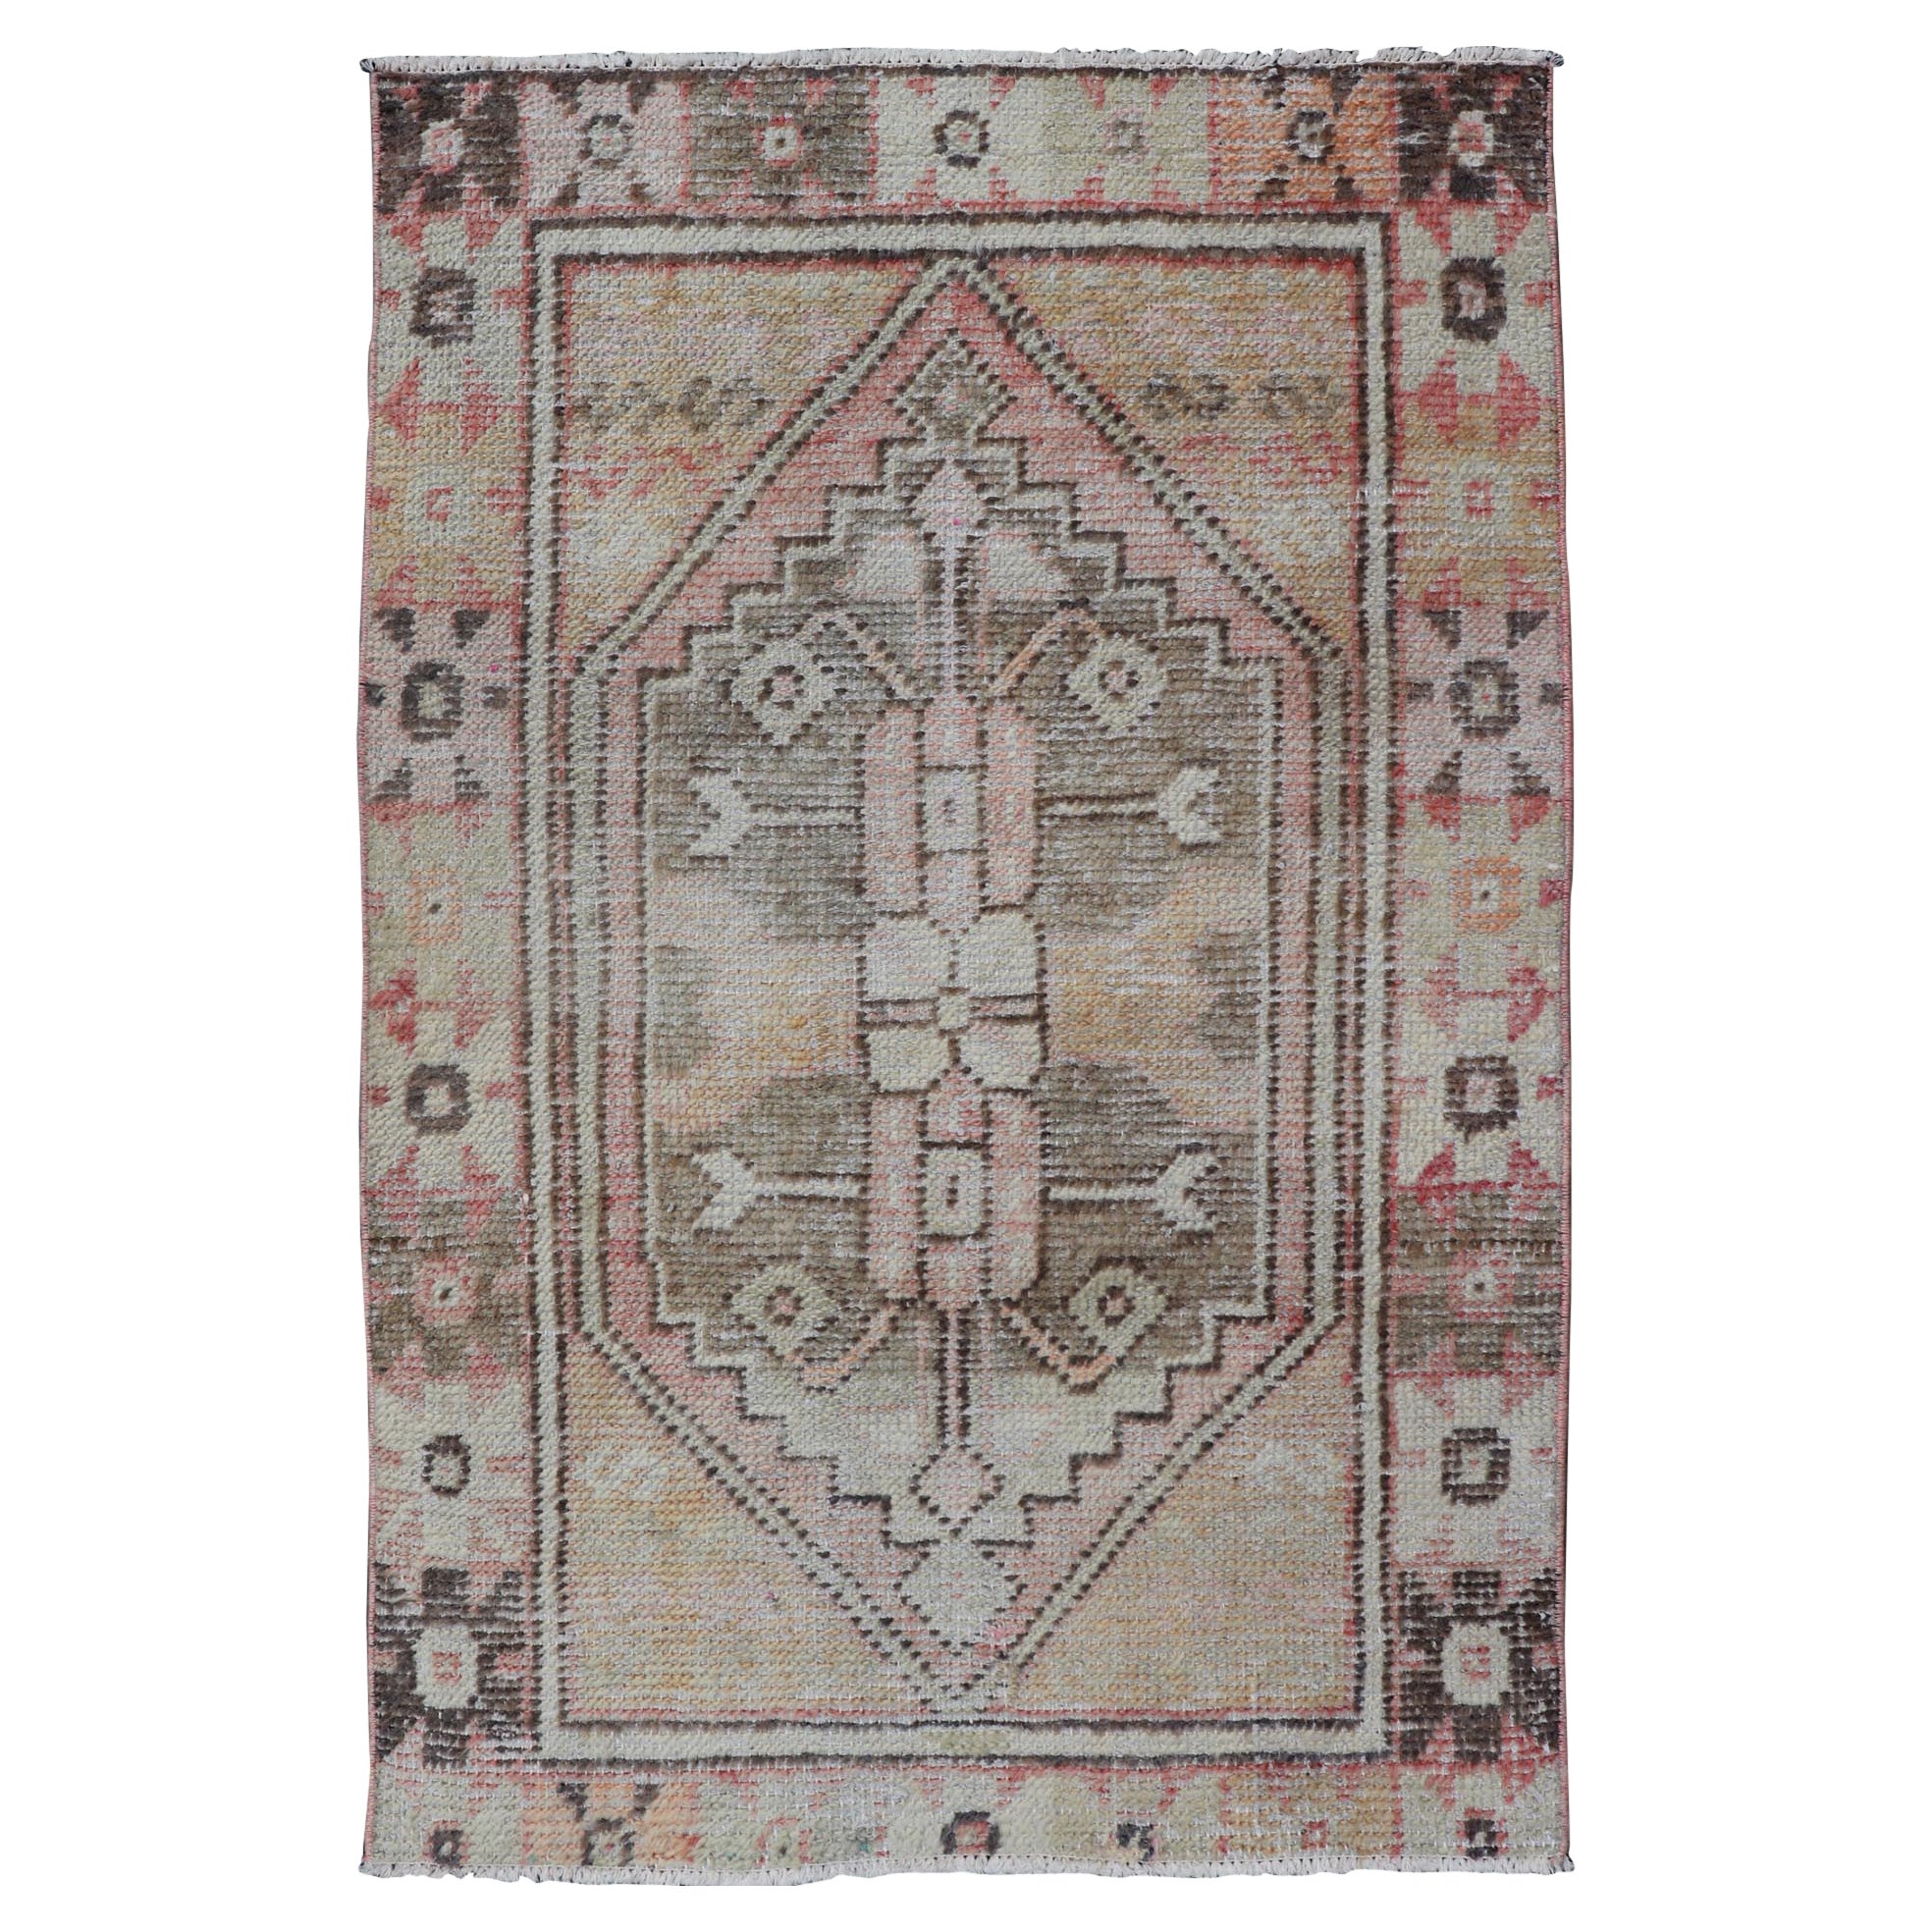 Vintage Turkish Oushak Carpet with Beautiful Floral Motifs and Medallion 